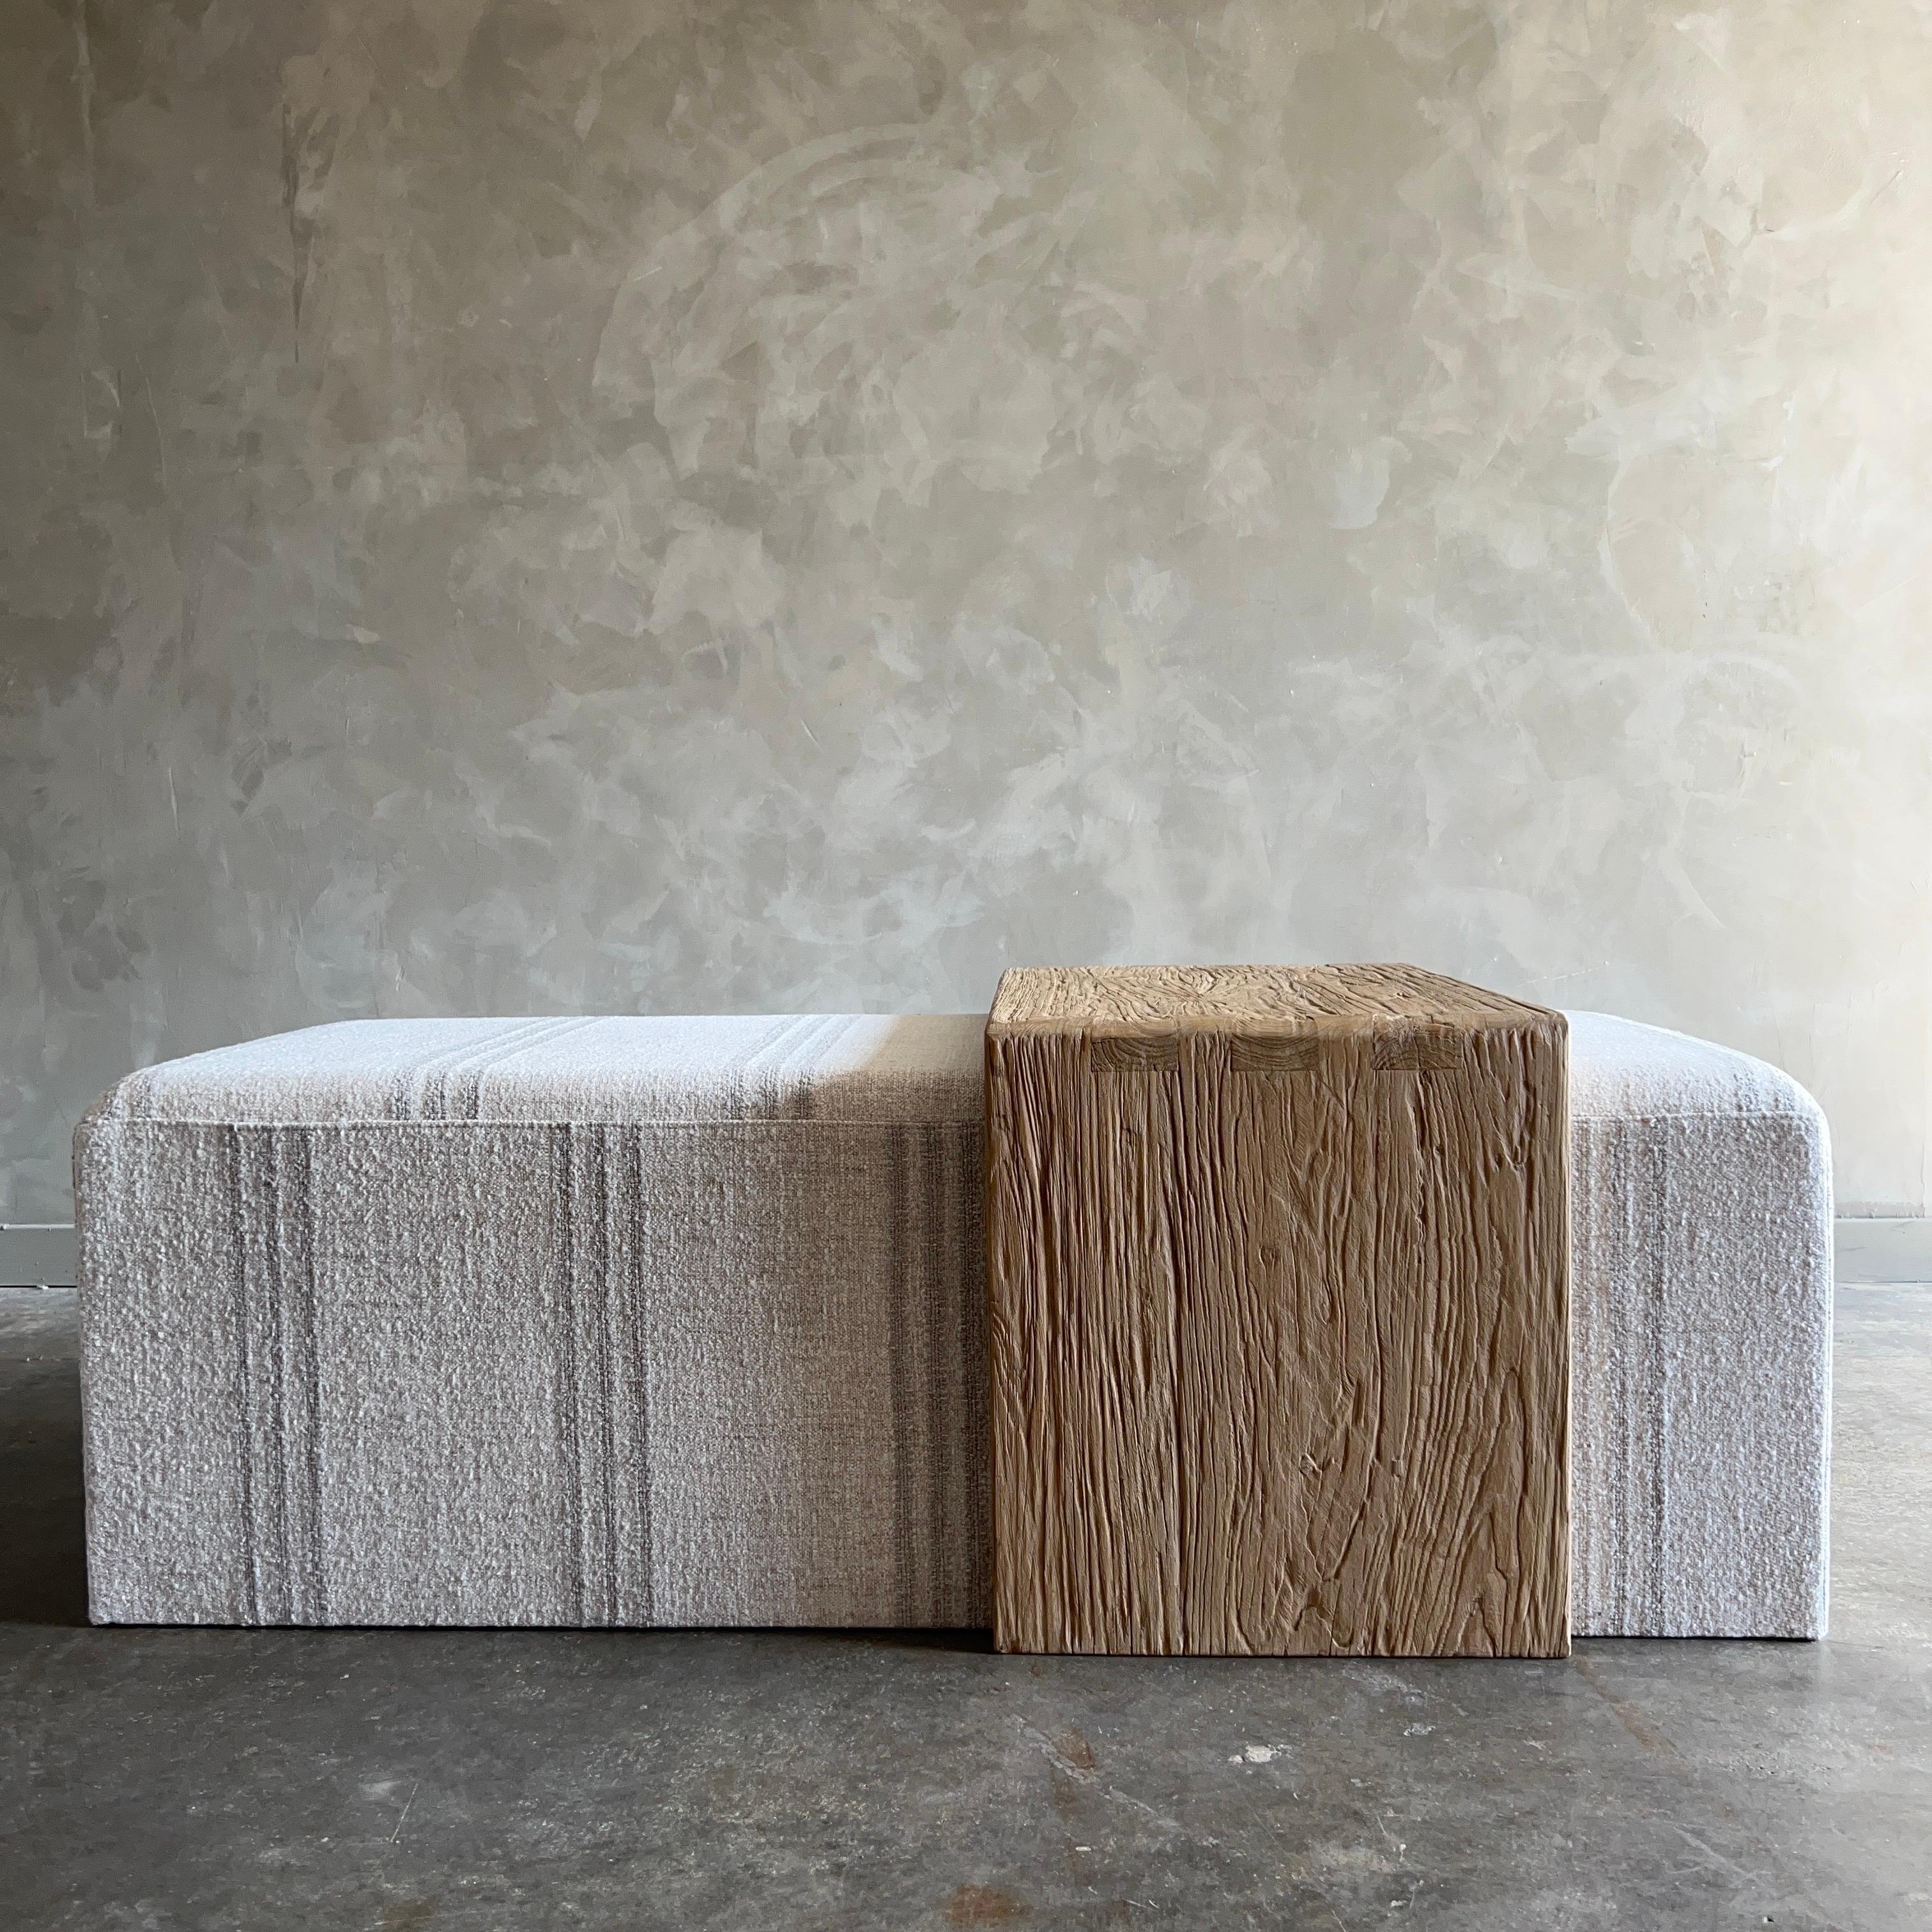 Windsor Cocktail Ottoman with Elm Wood Table 
Our cube ottoman is upholstered in a beautiful linen with flax linen stripes. A light oatmeal color with flax, dark natural stripes give this a vintage style.  The hand-crafted solid elm wood waterfall